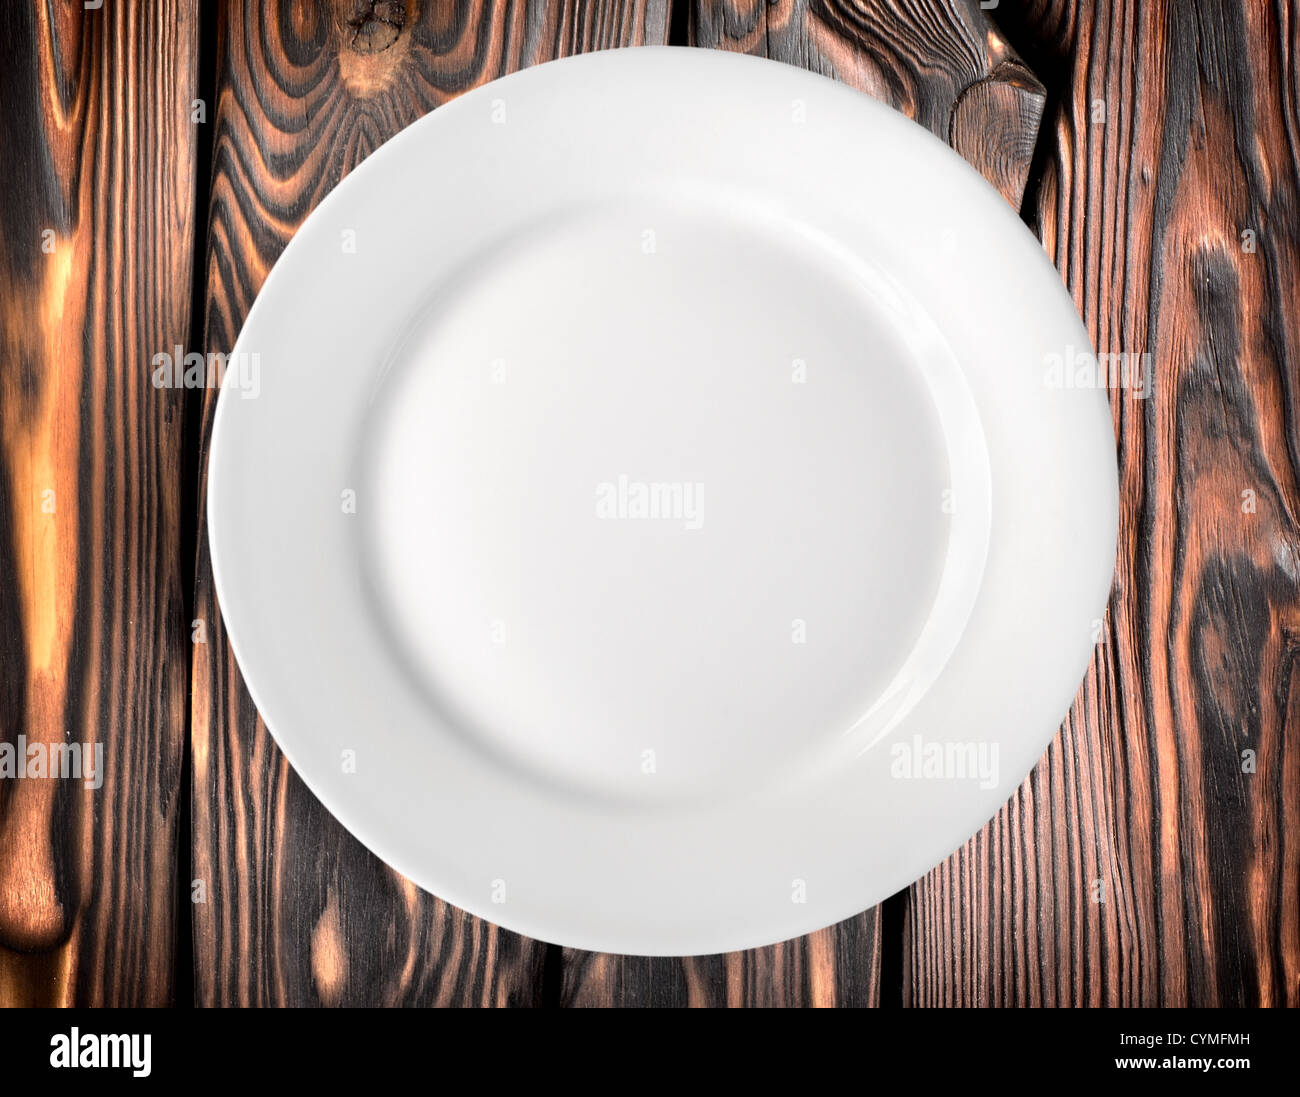 White plate on a dark wooden table Stock Photo